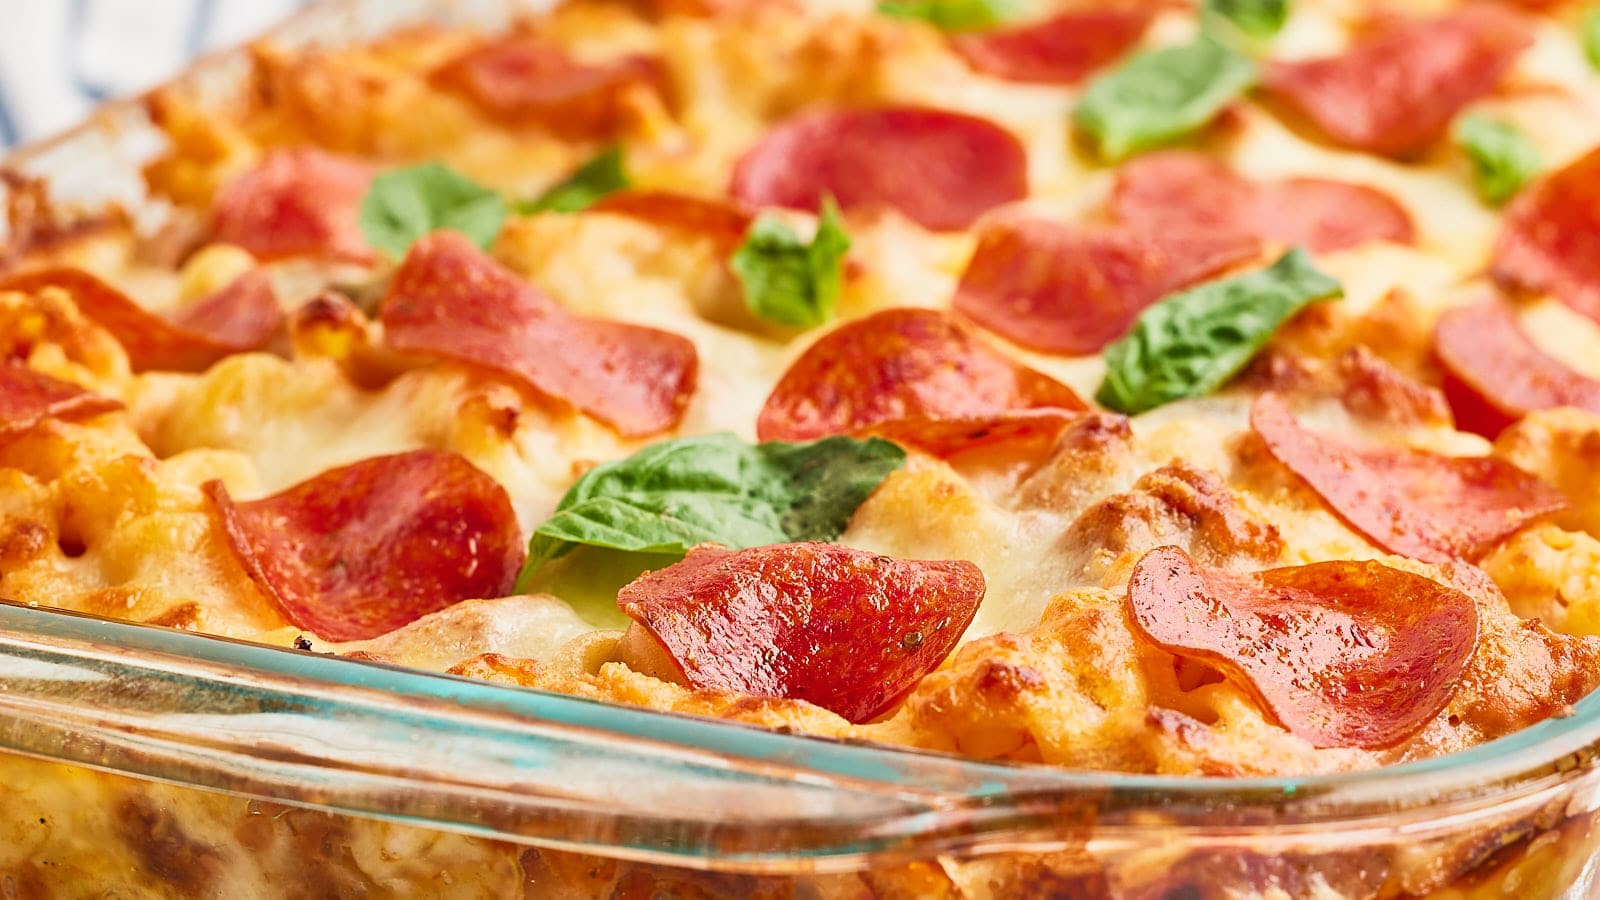 A casserole dish filled with pepperoni and cheese.